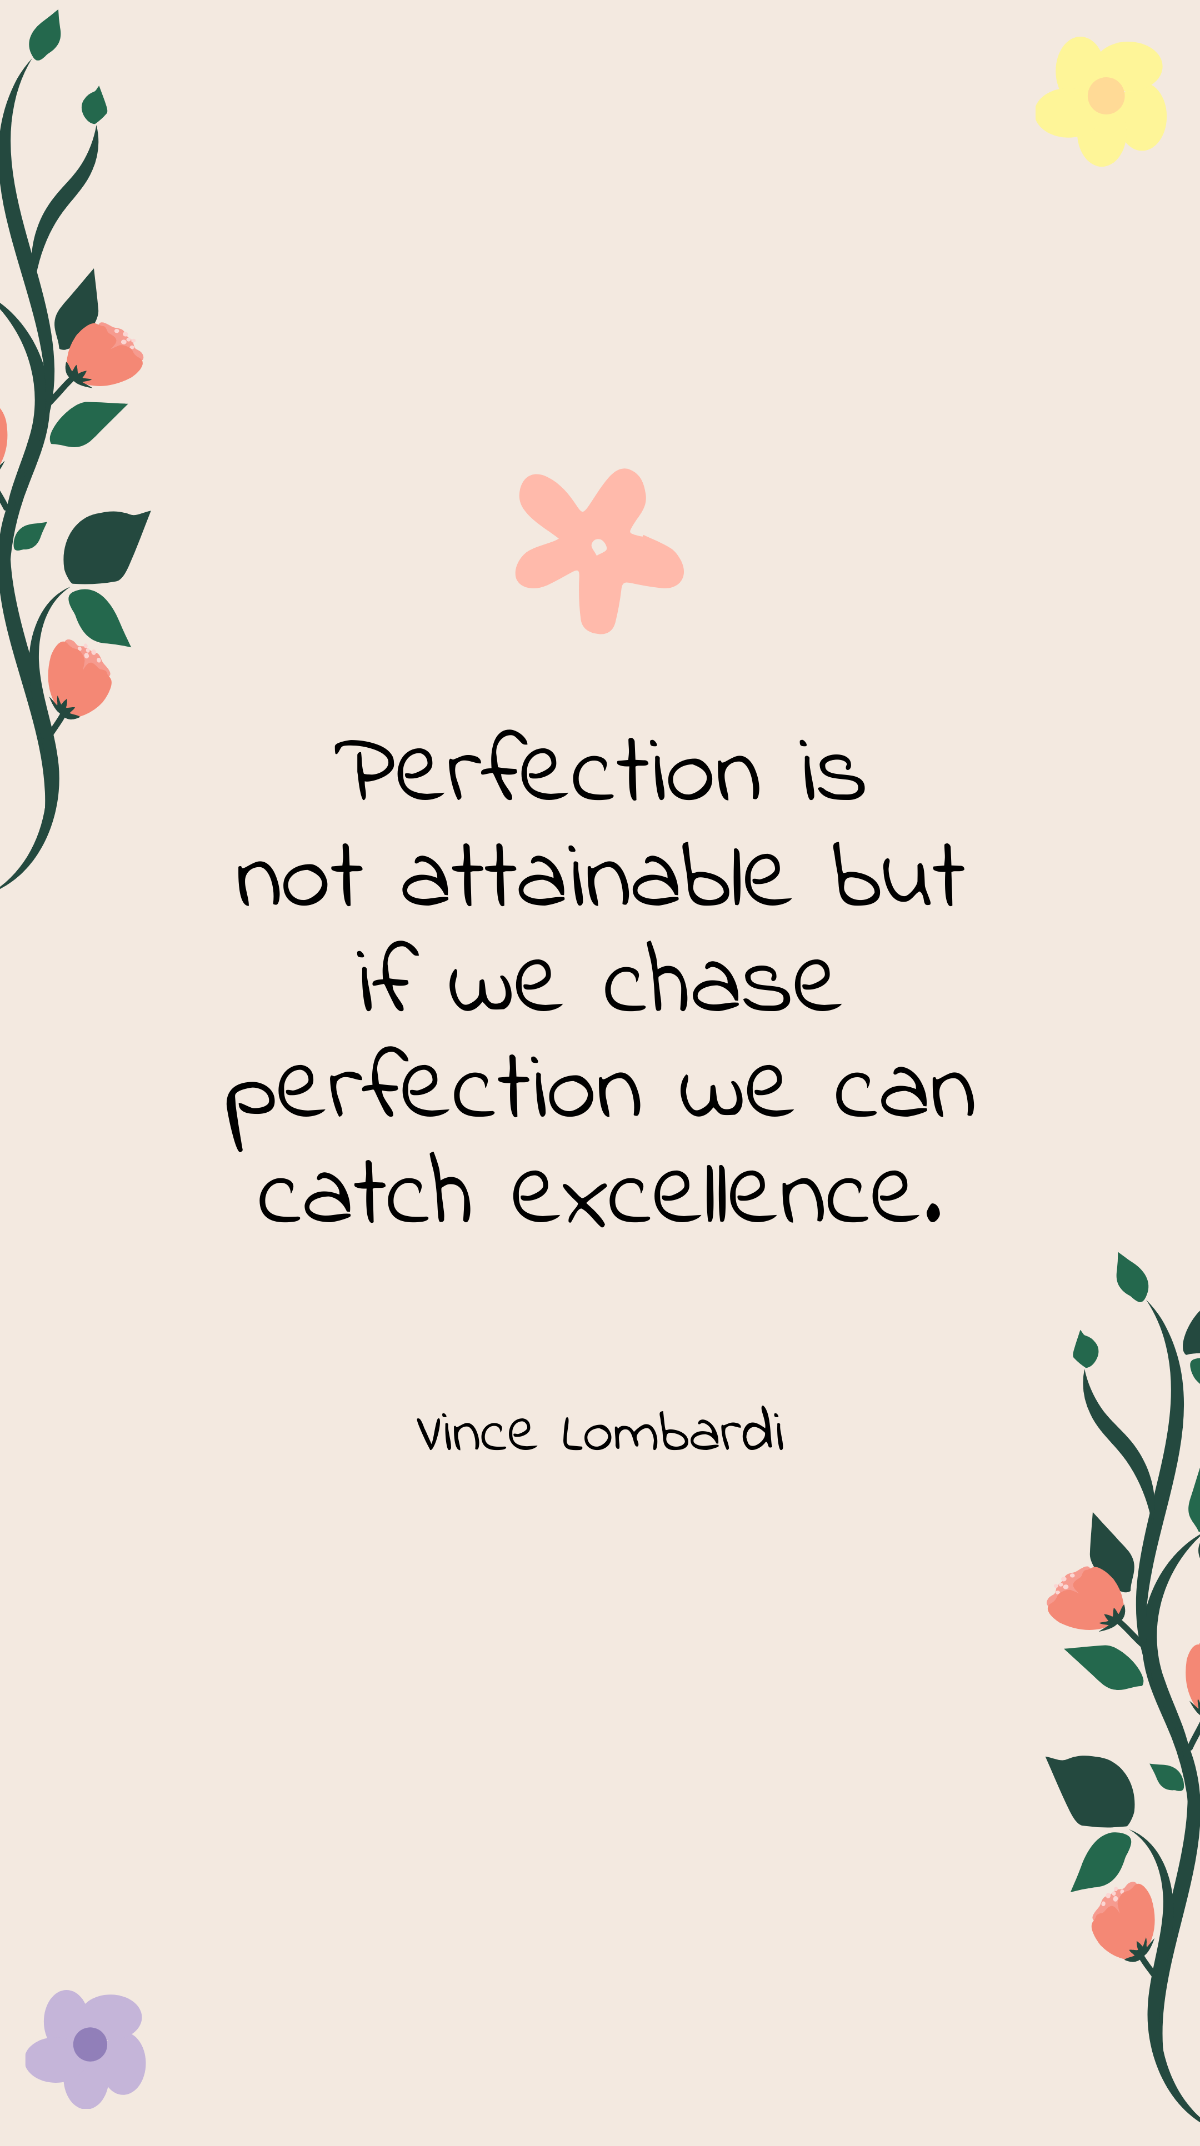 Vince Lombardi - Perfection is not attainable but if we chase ...